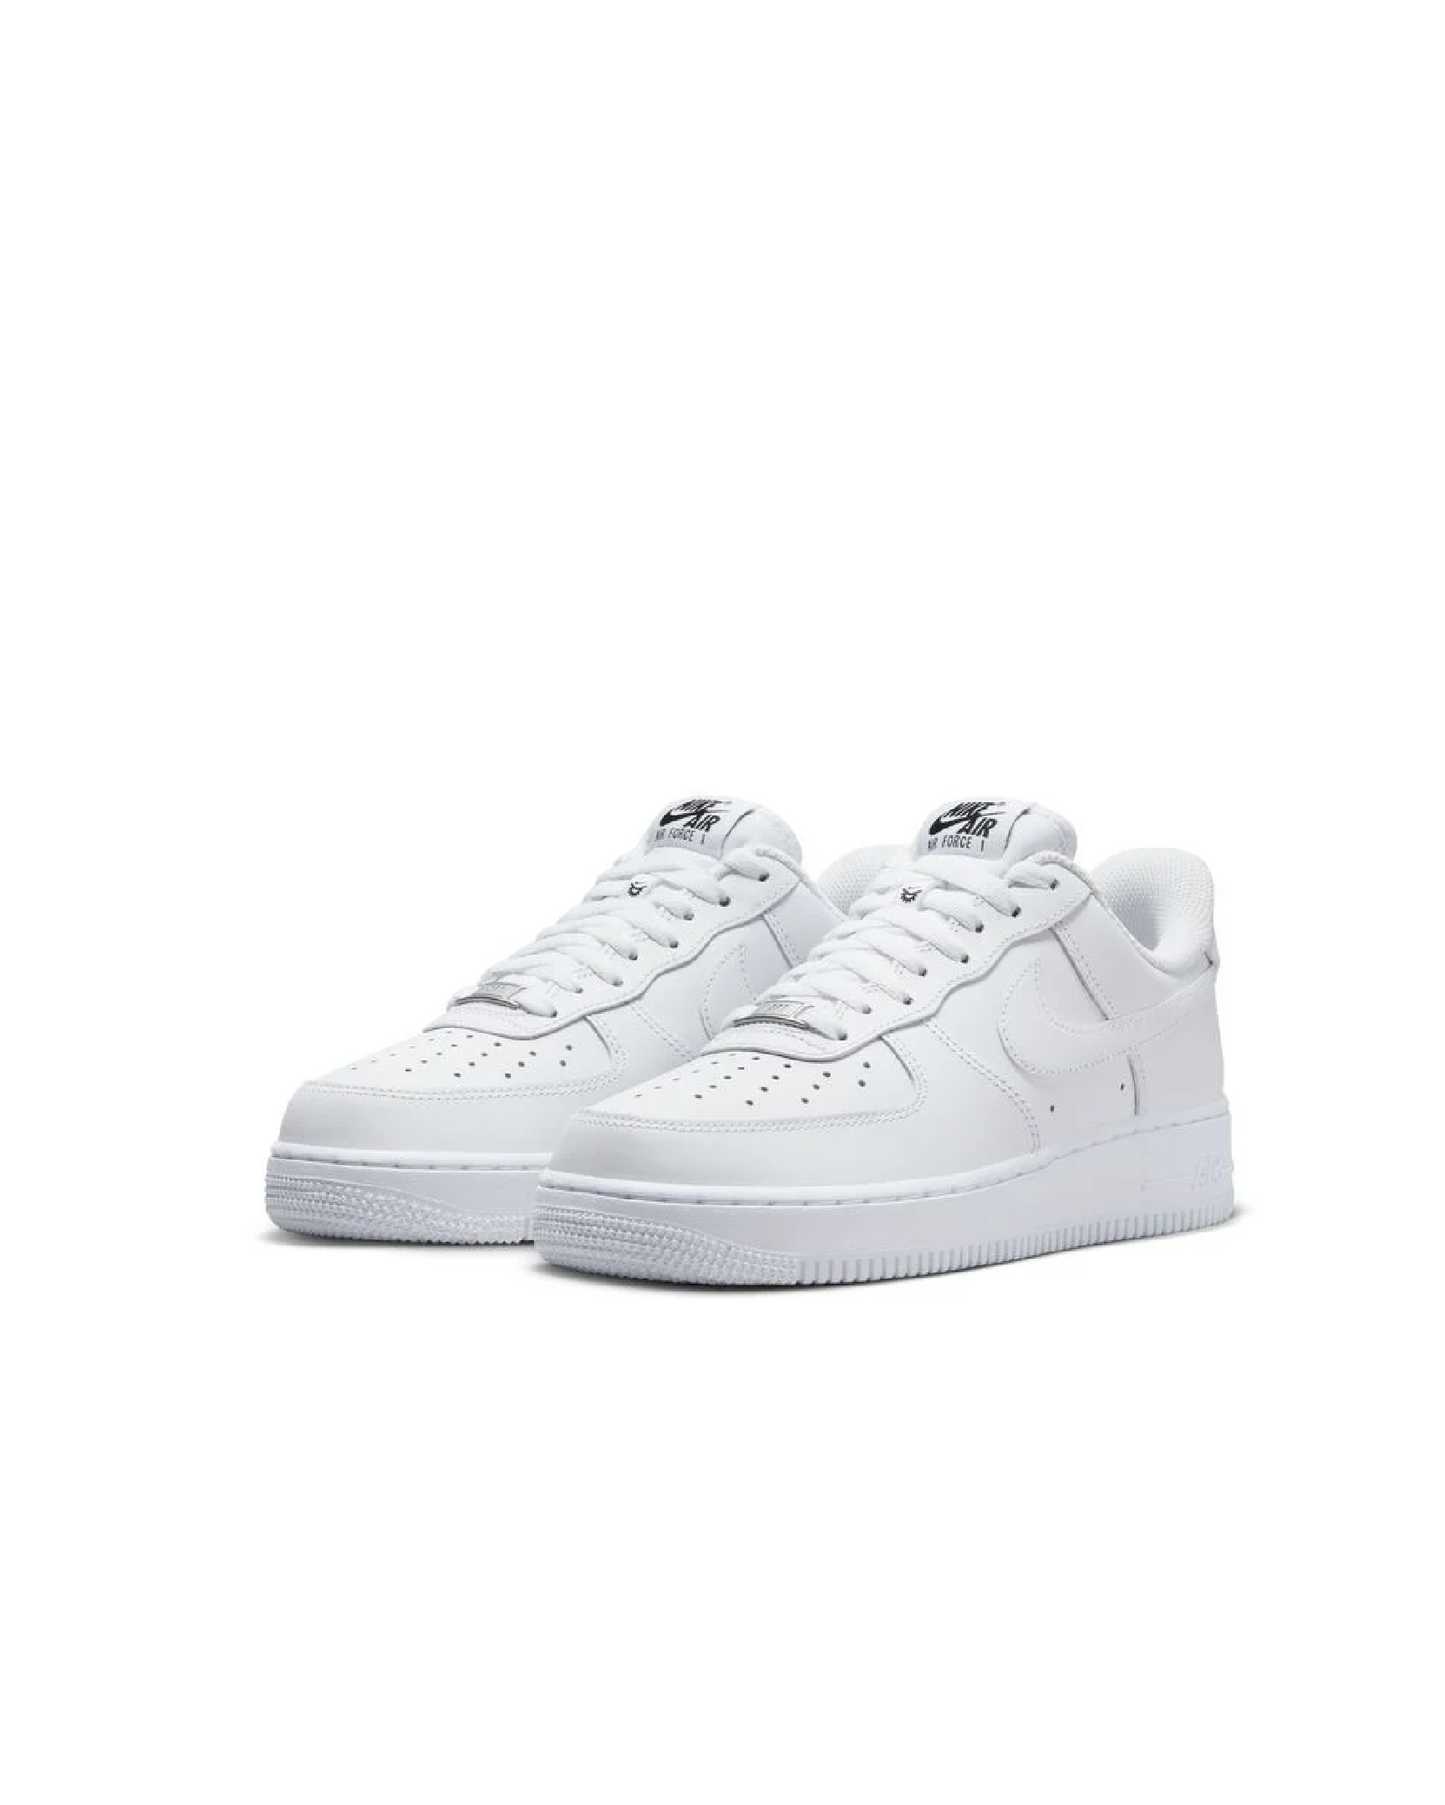 NIKE W AIR FORCE 1 '07 FLYEASE - WHITE